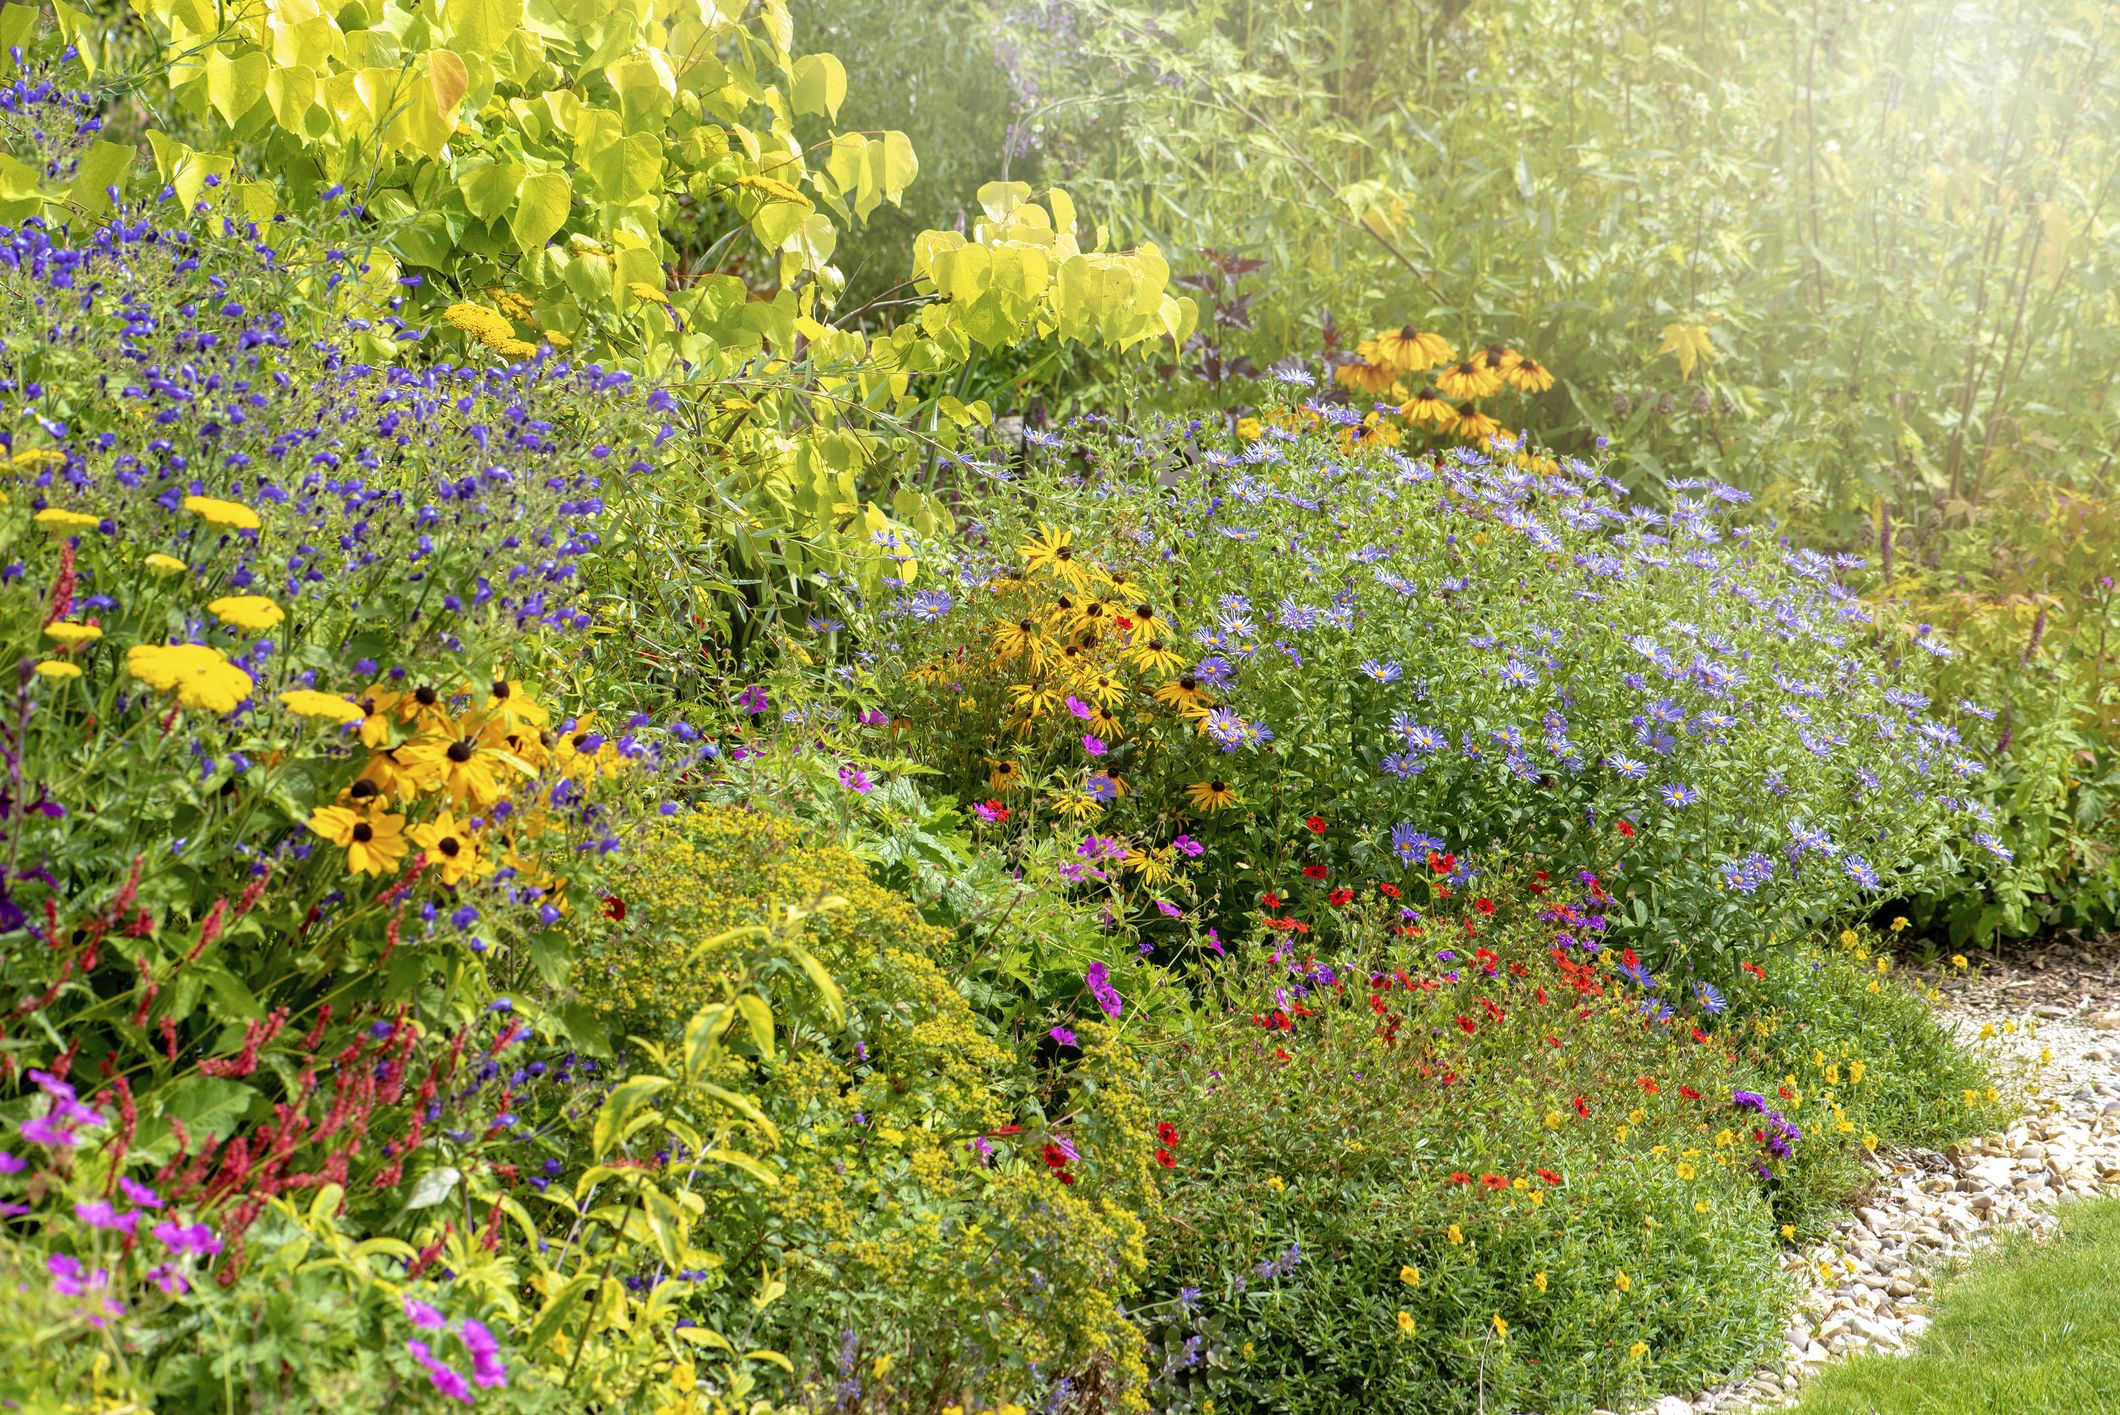 How To Plan Your Garden For The Best Seasonal Variety